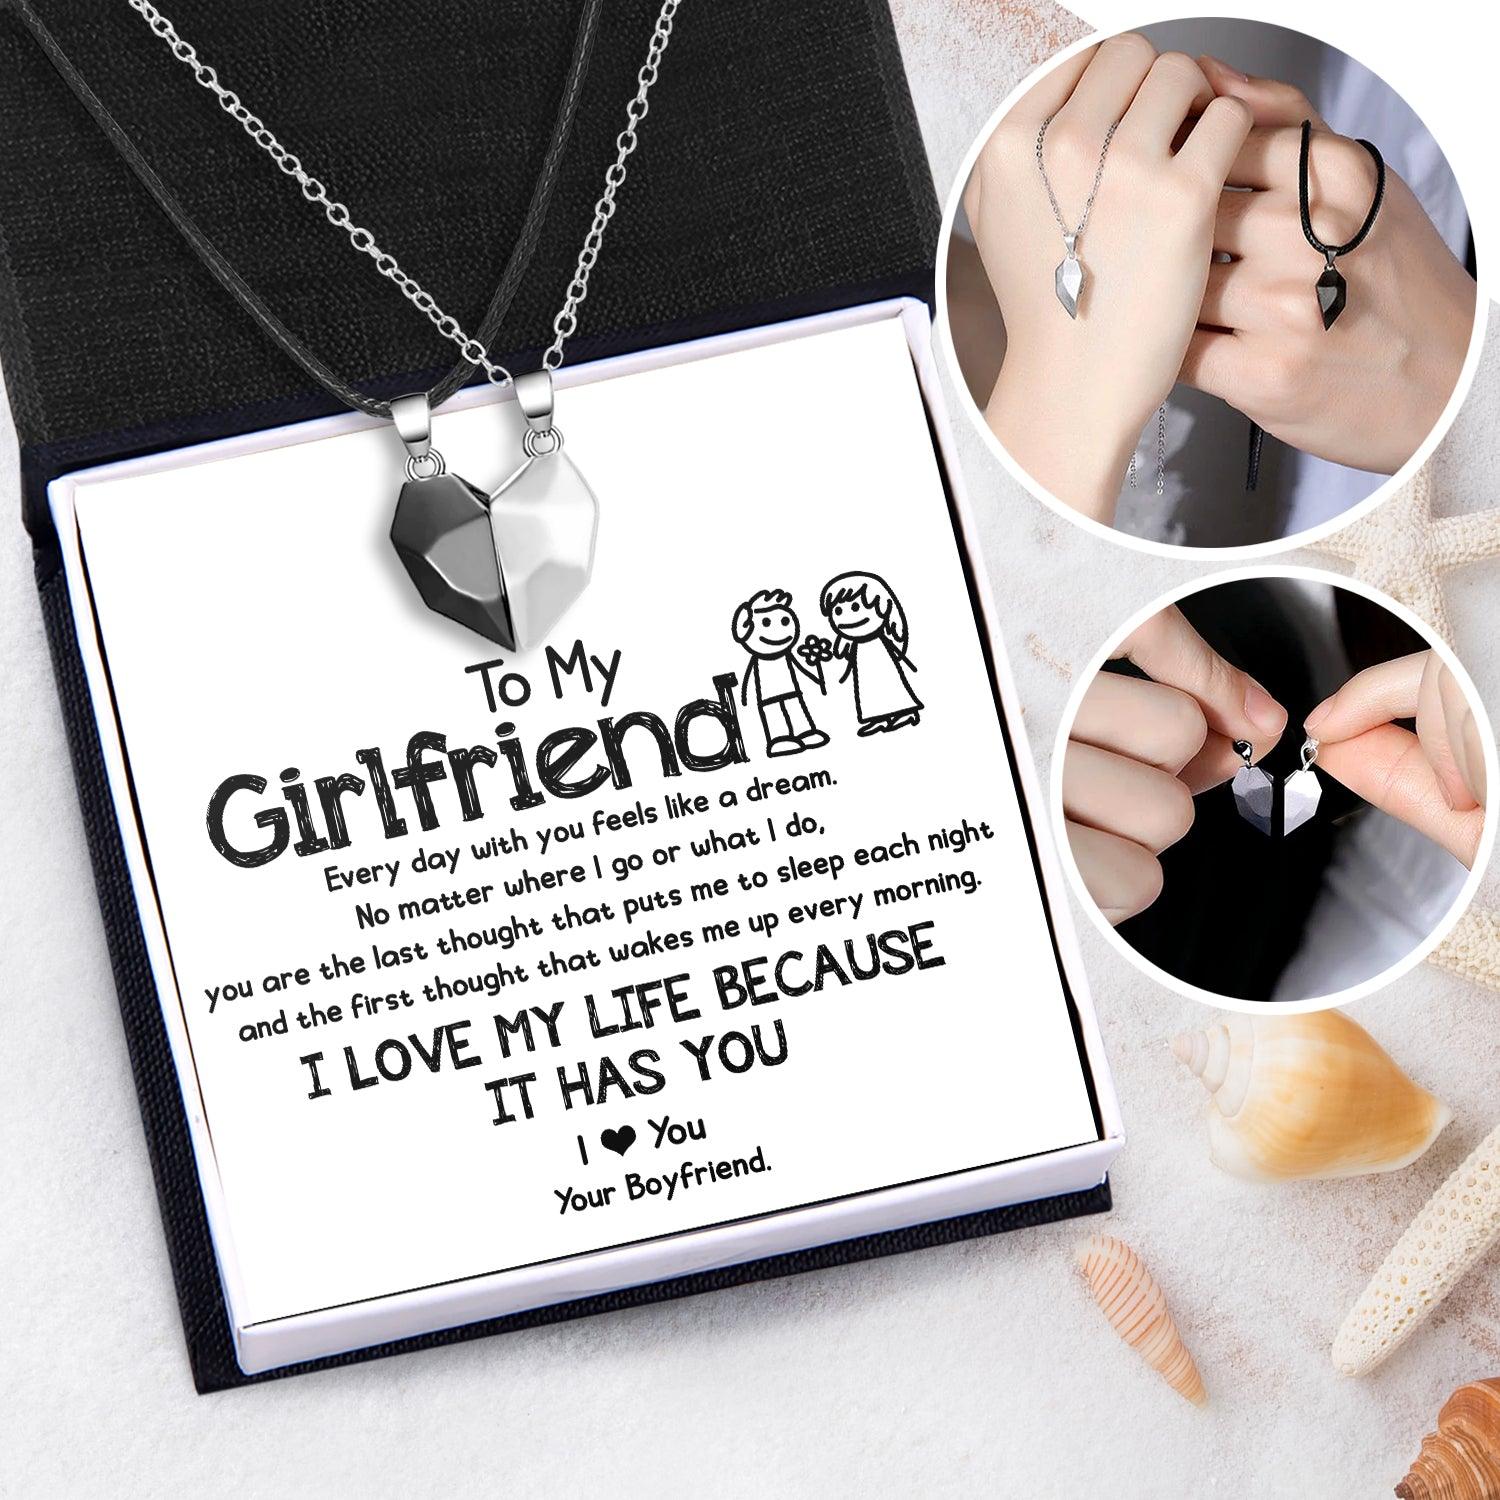 Magnetic Love Necklaces - Family - To My Girlfriend - I Love You - Augnni13010 - Gifts Holder